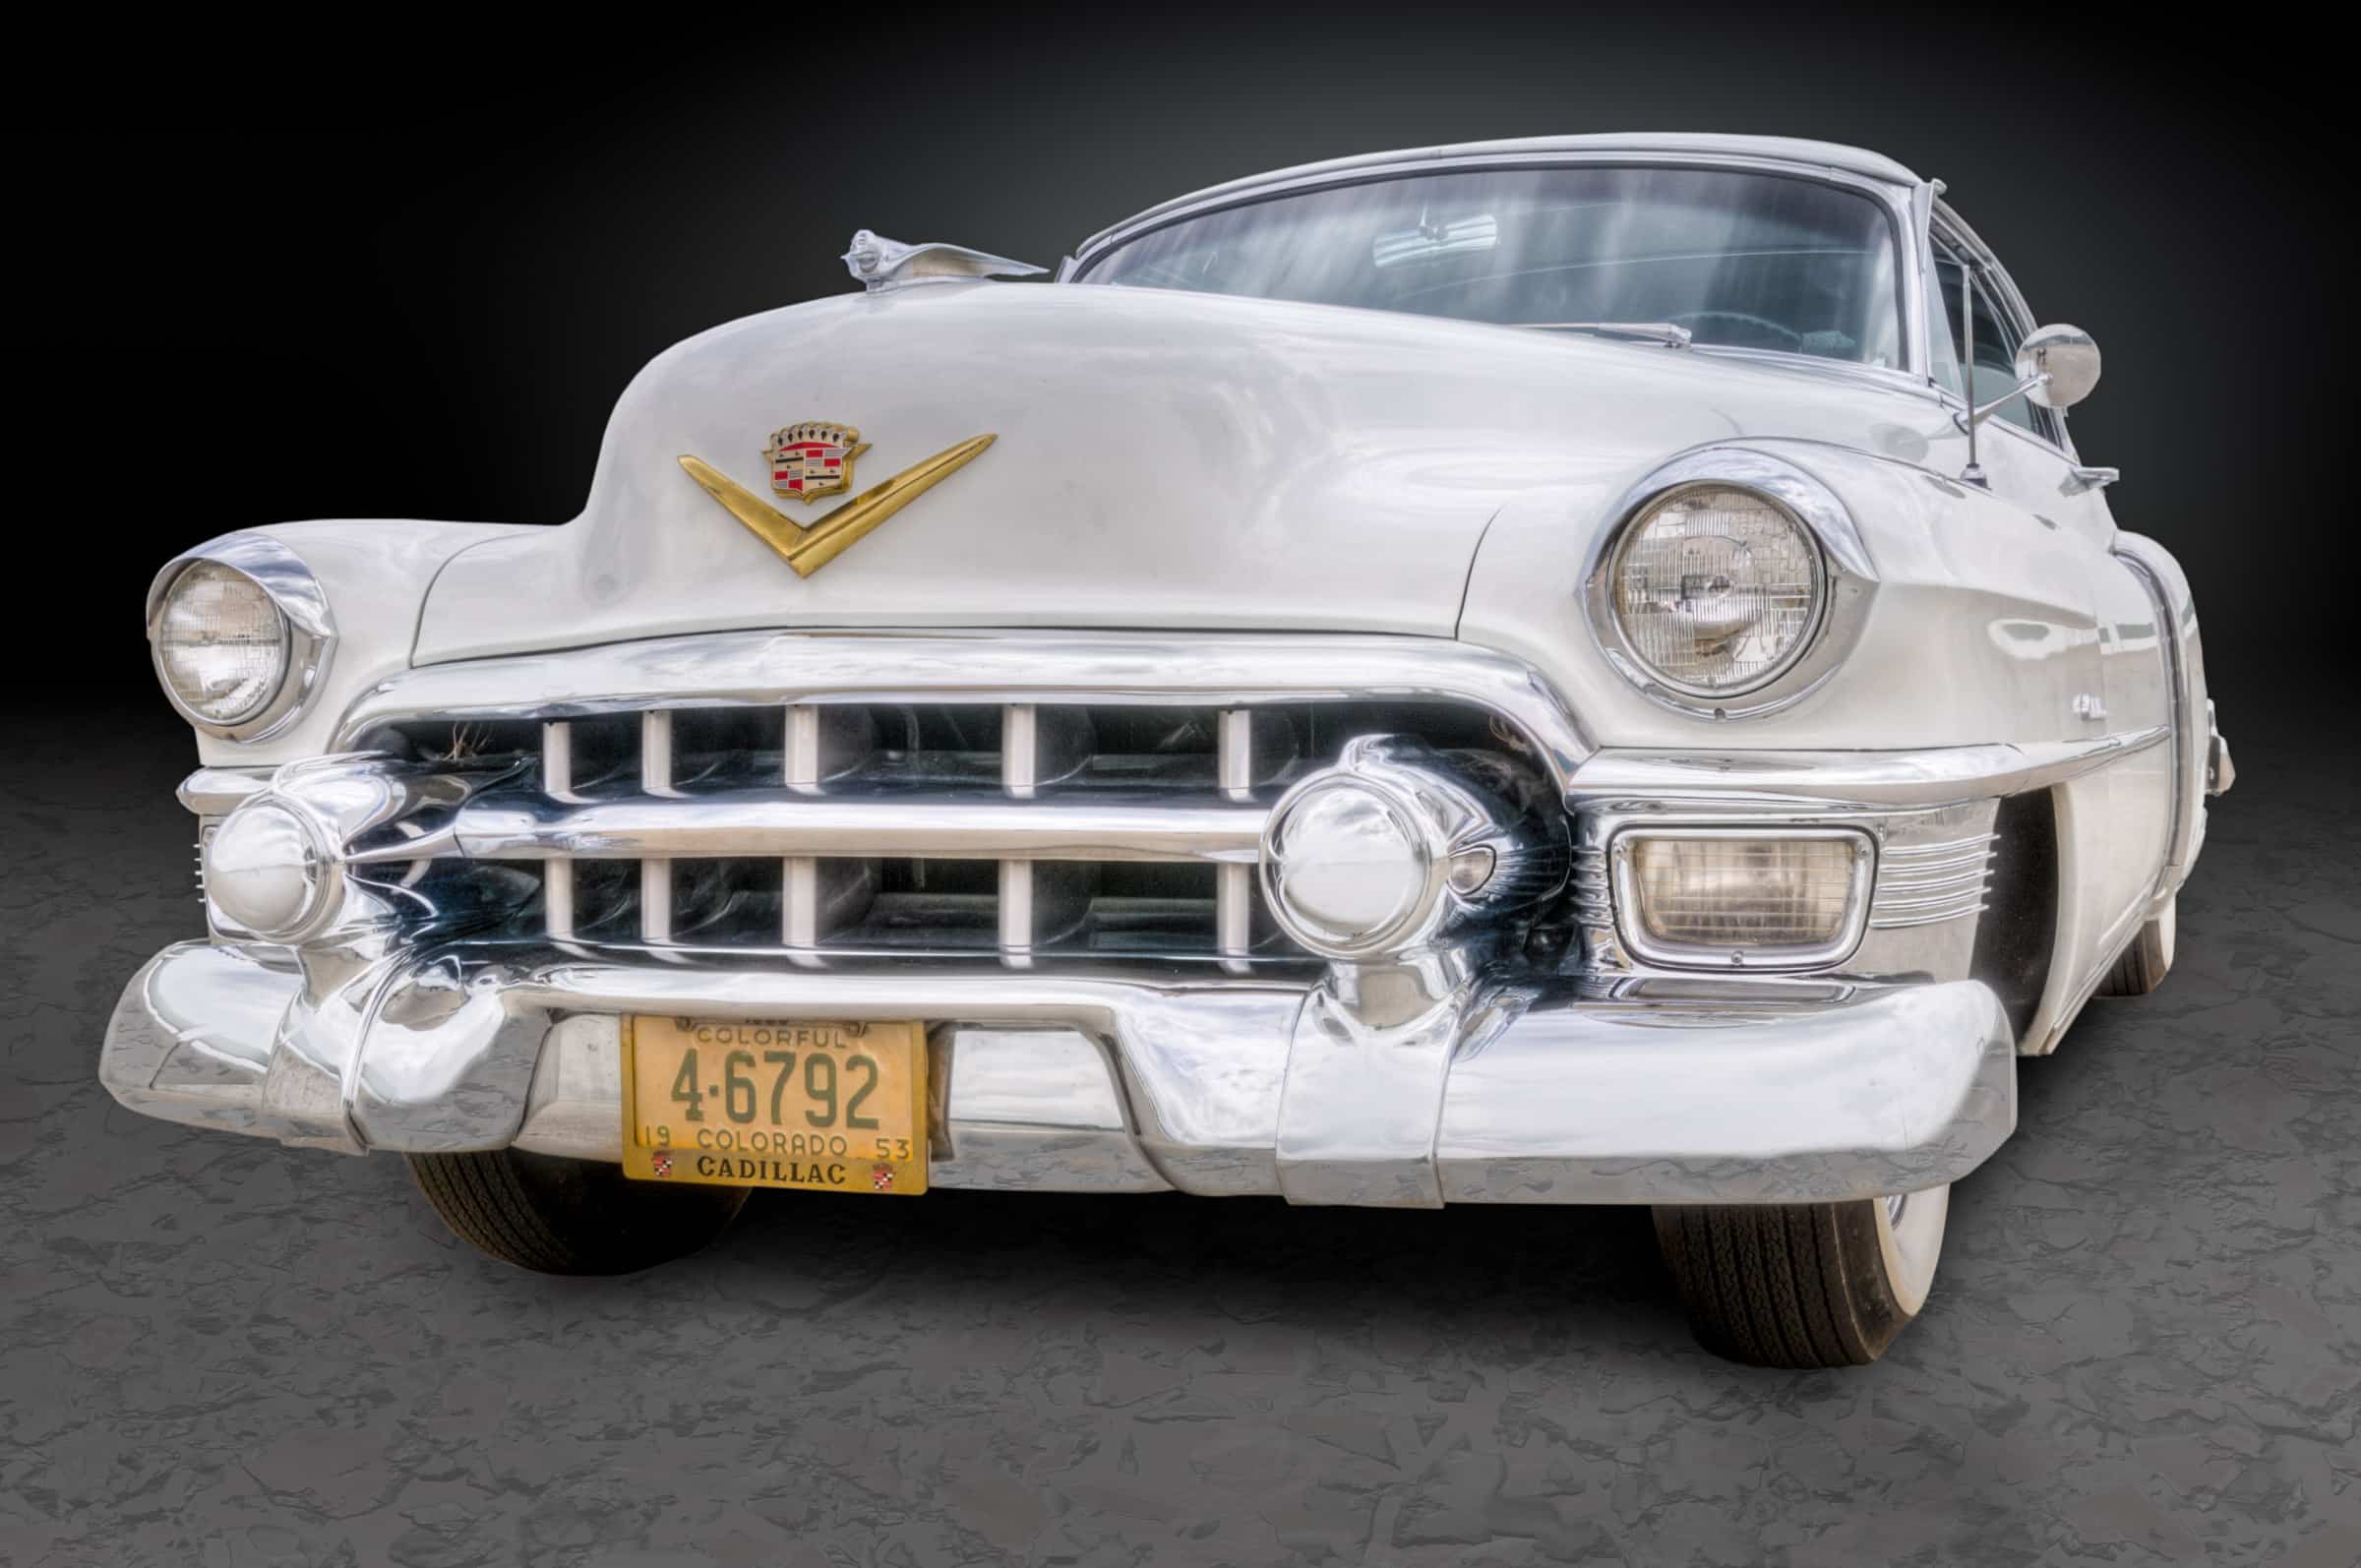 1953 Cadillac Coupe deVille - Front view.